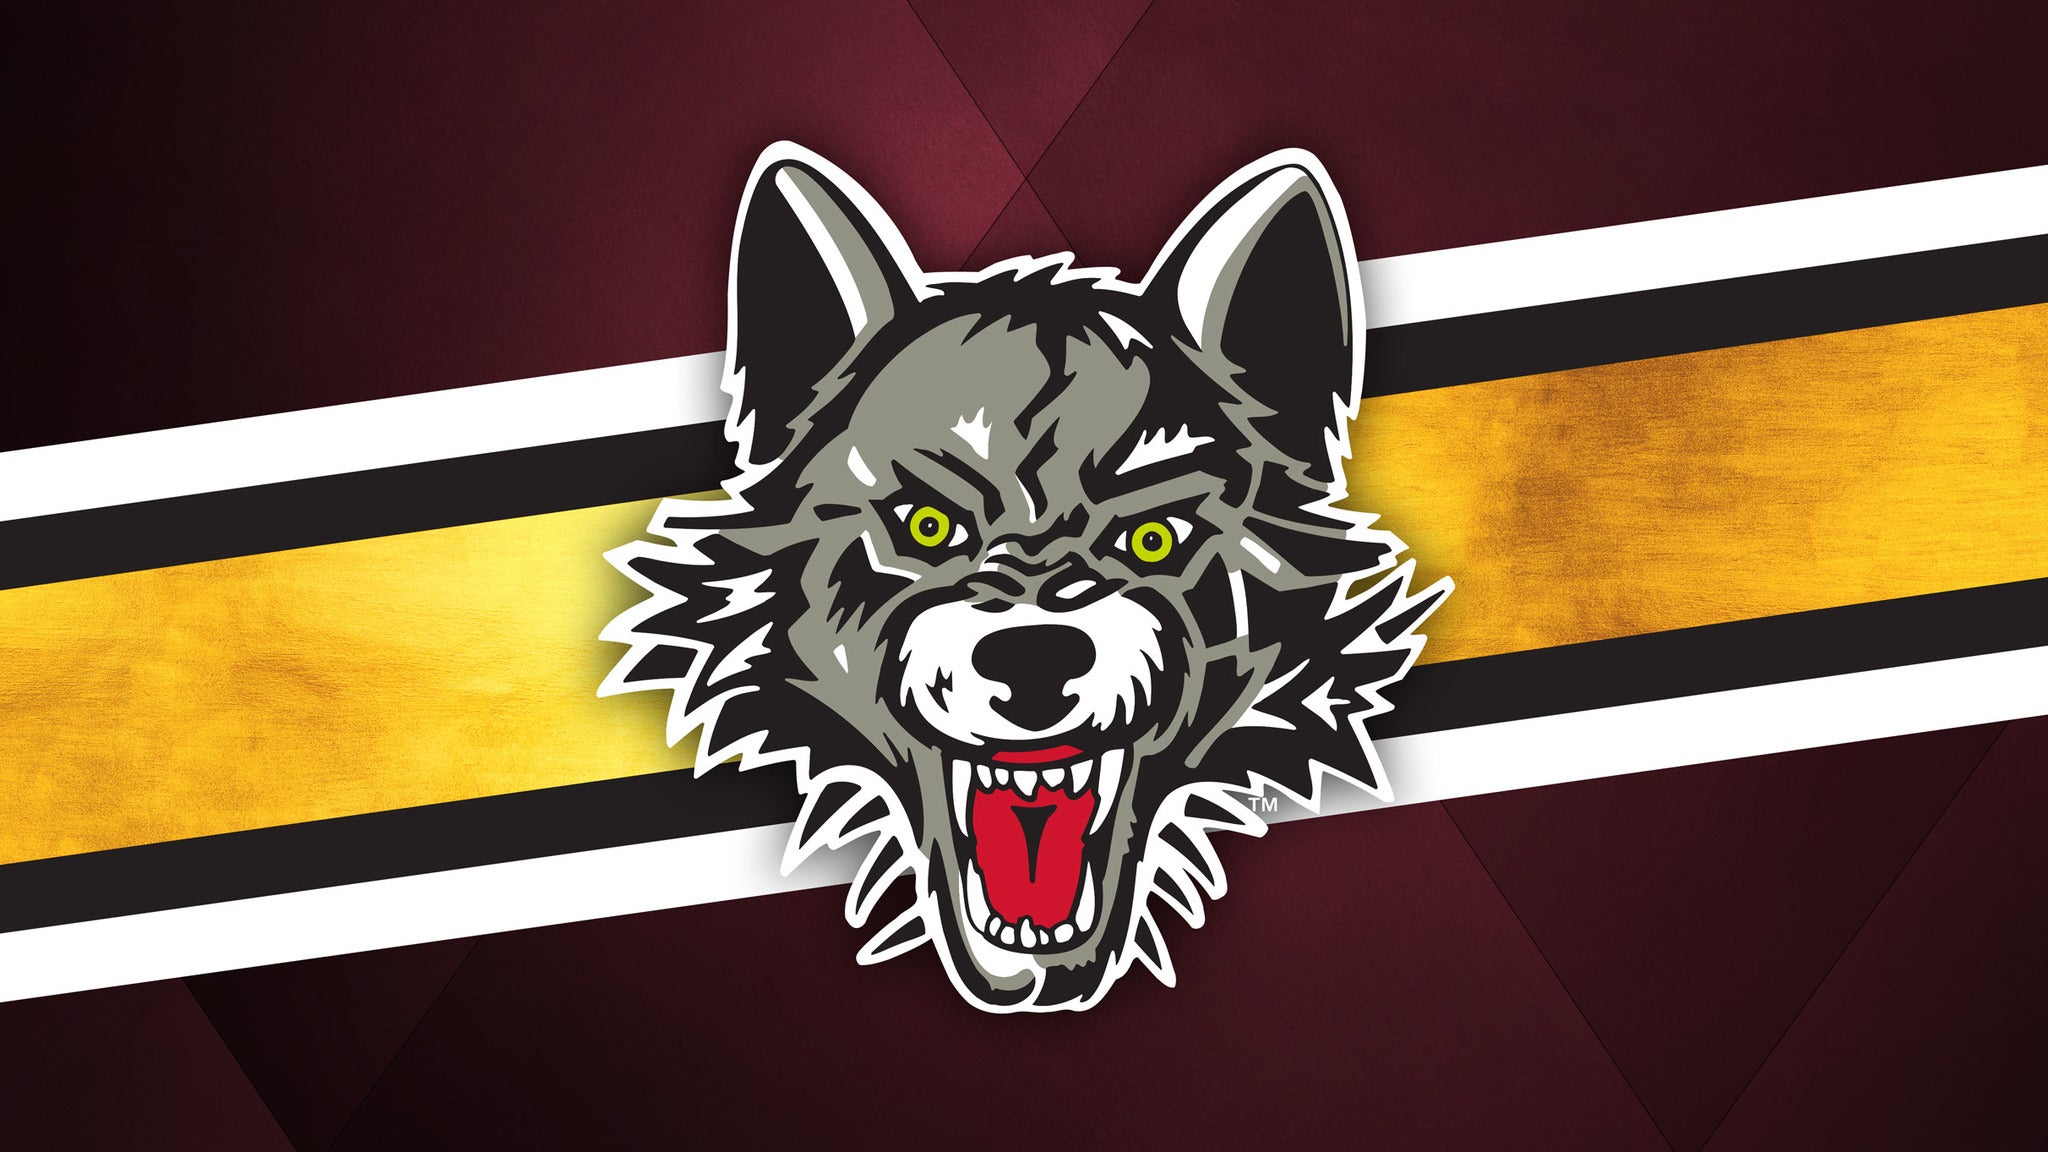 Photo Galleries  Chicago Ice Hockey Team - Chicago Wolves